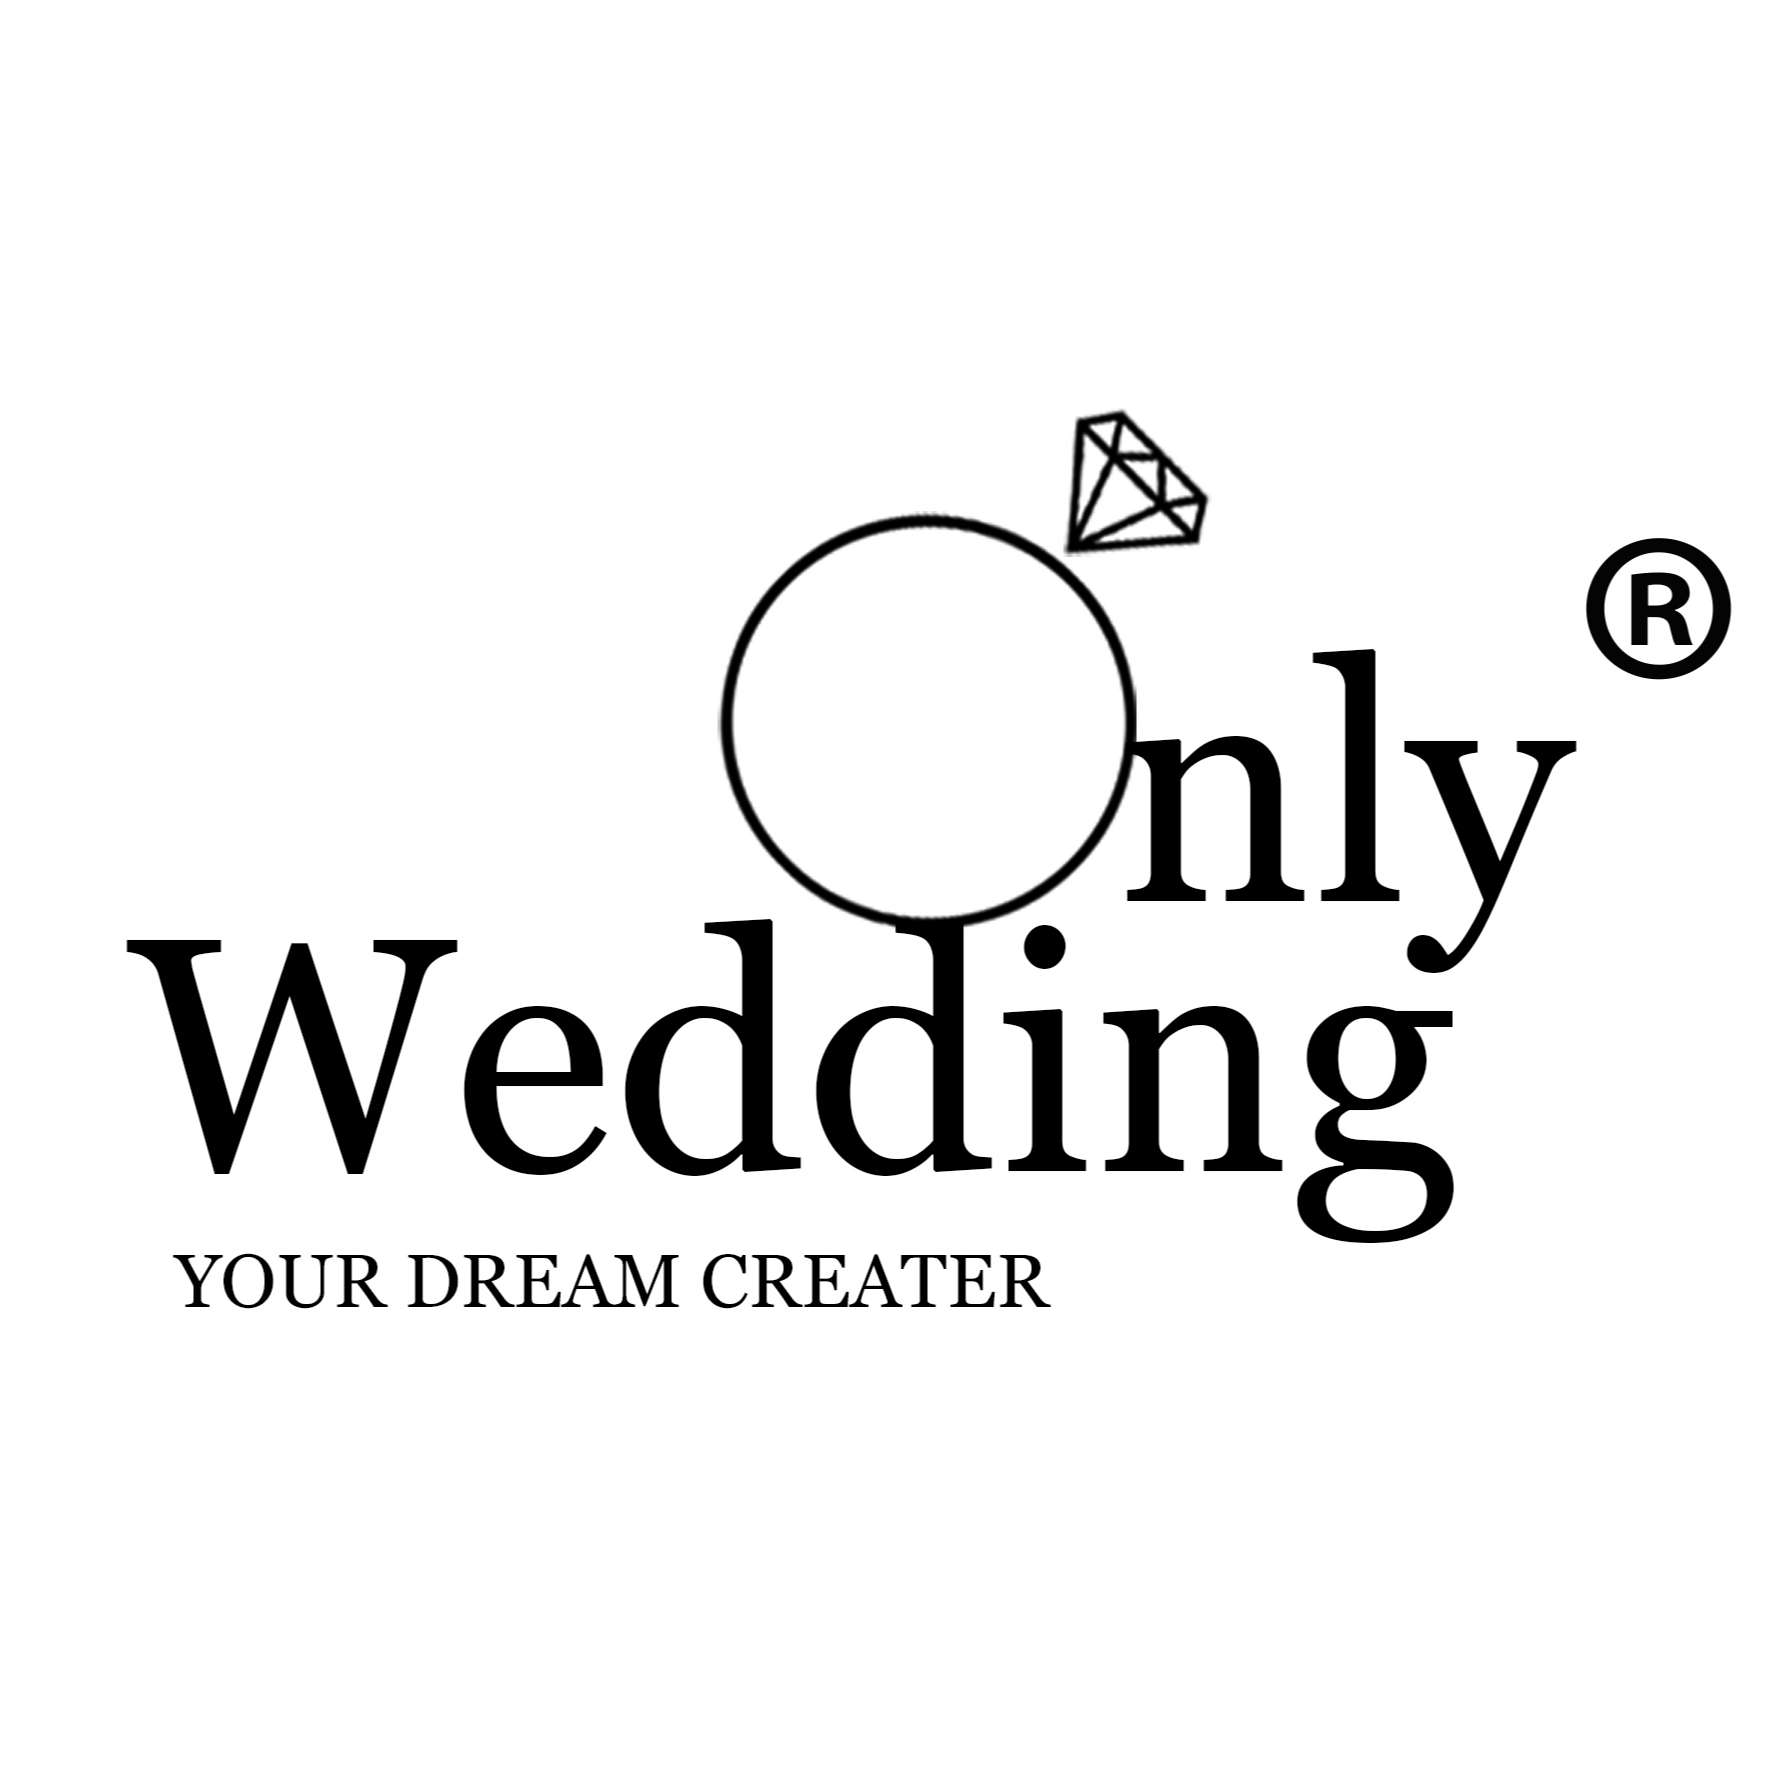 Only婚礼 